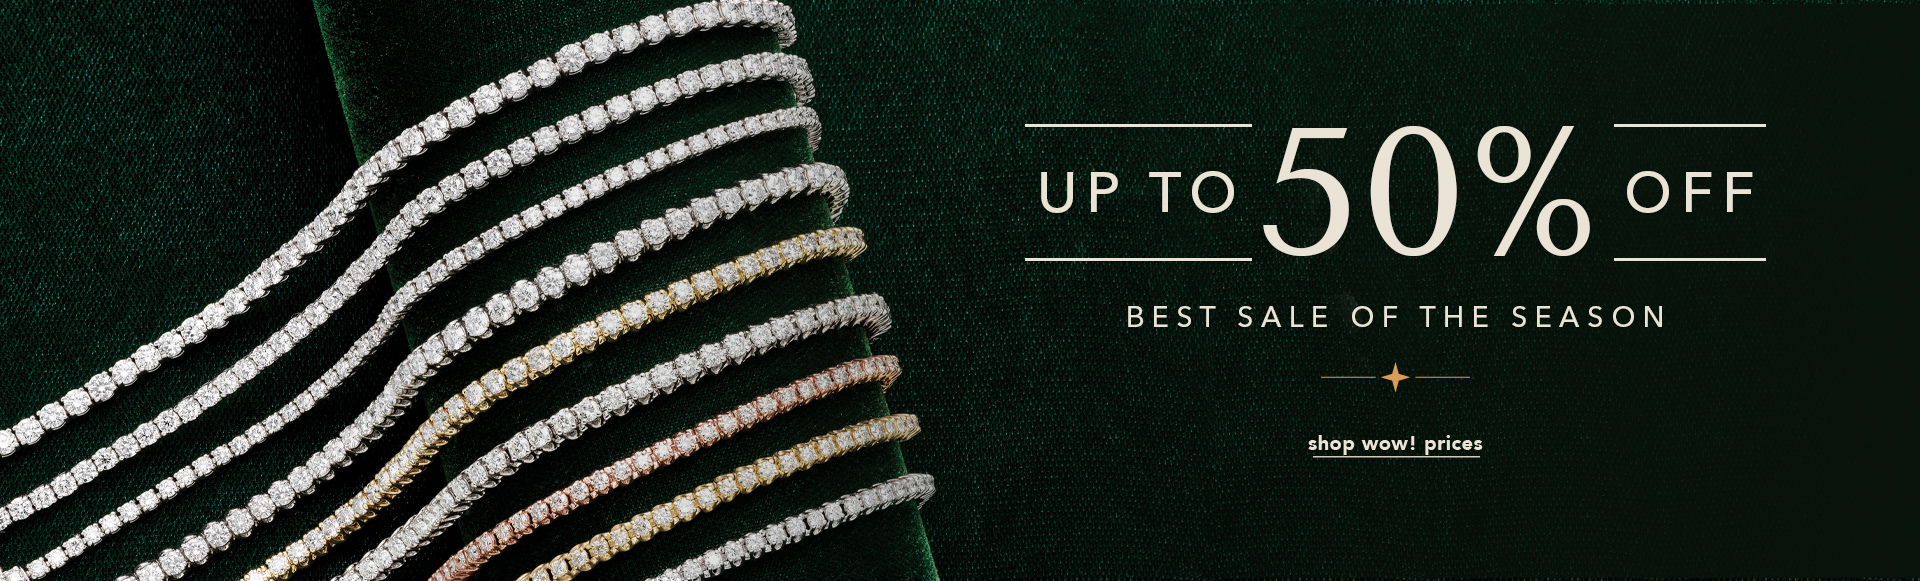 Up to 50% off. Best Sale of the season. Shop wow! Prices.